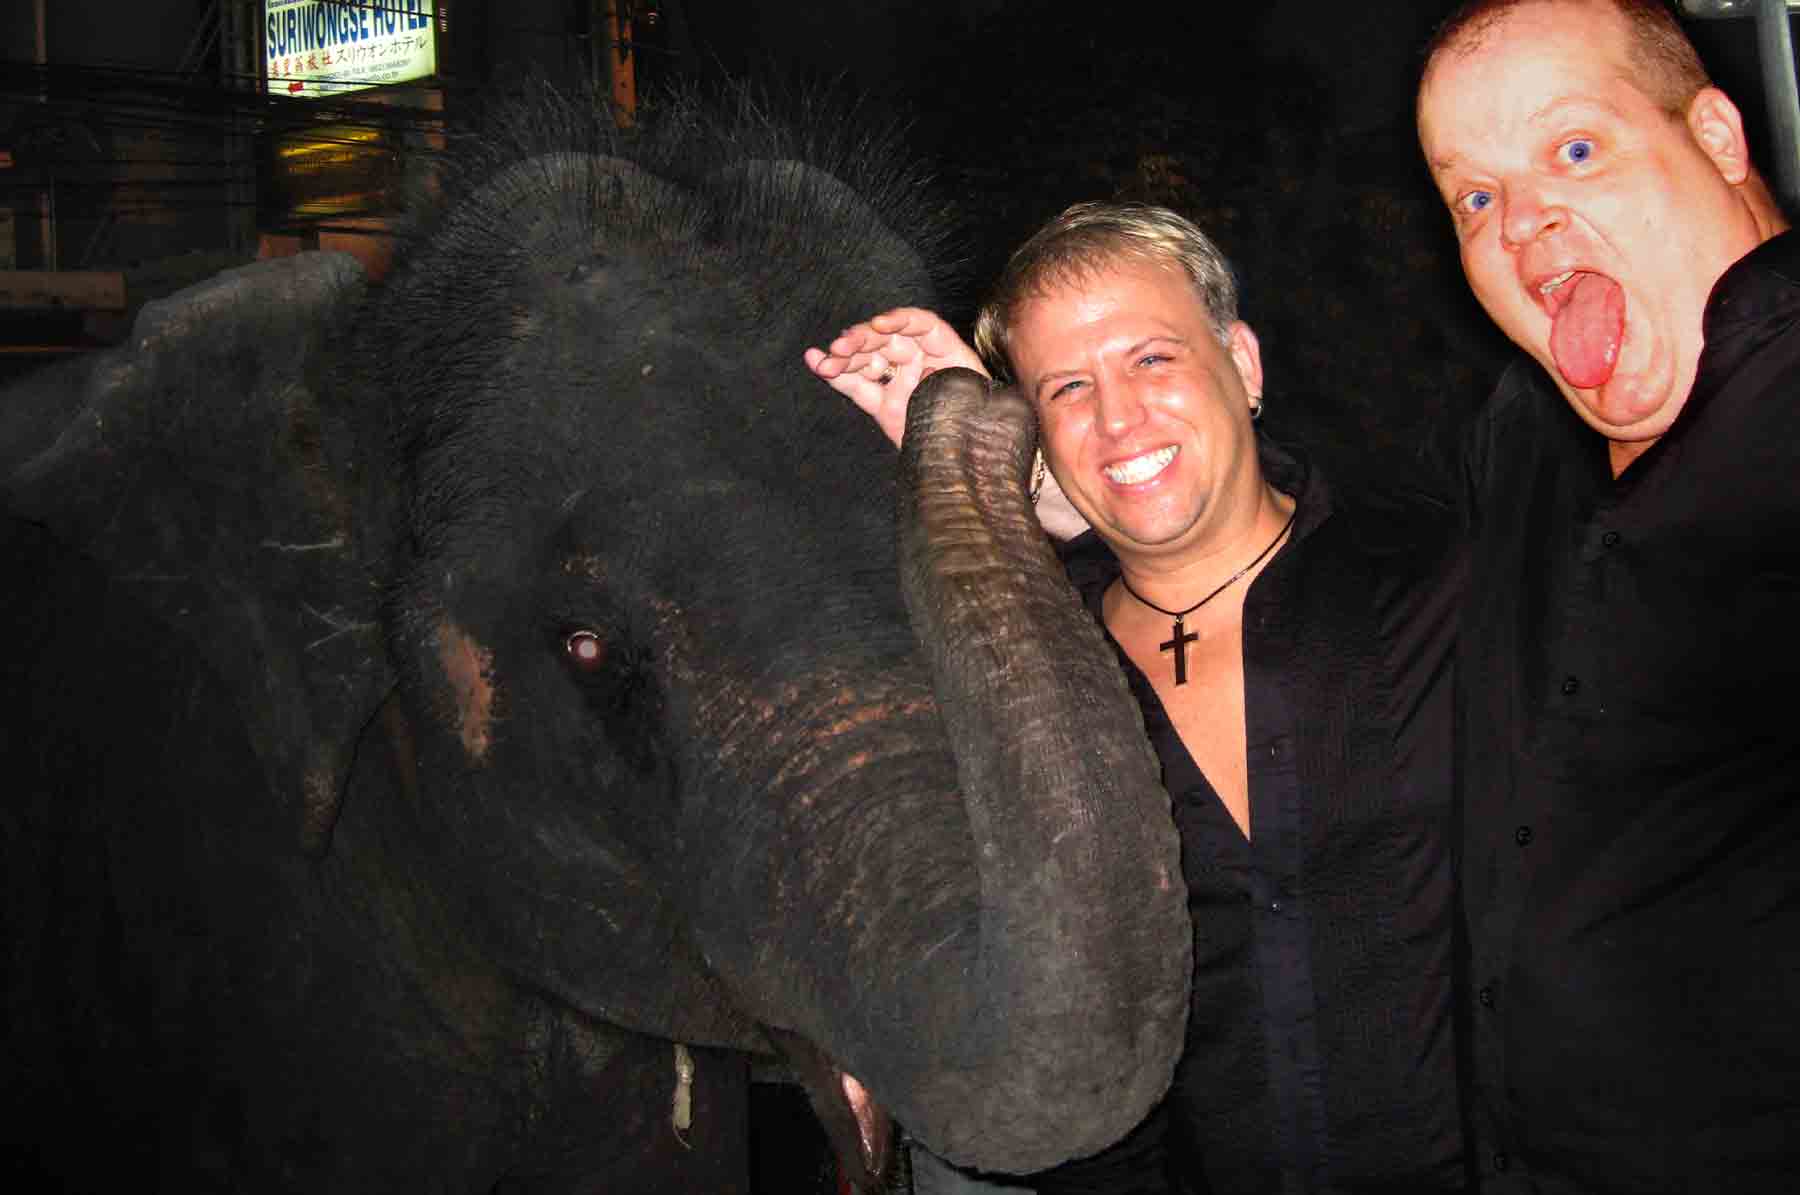 DJ and elephant (with Toby) in a Bangkok soi at around 2am on his birthday in 2006